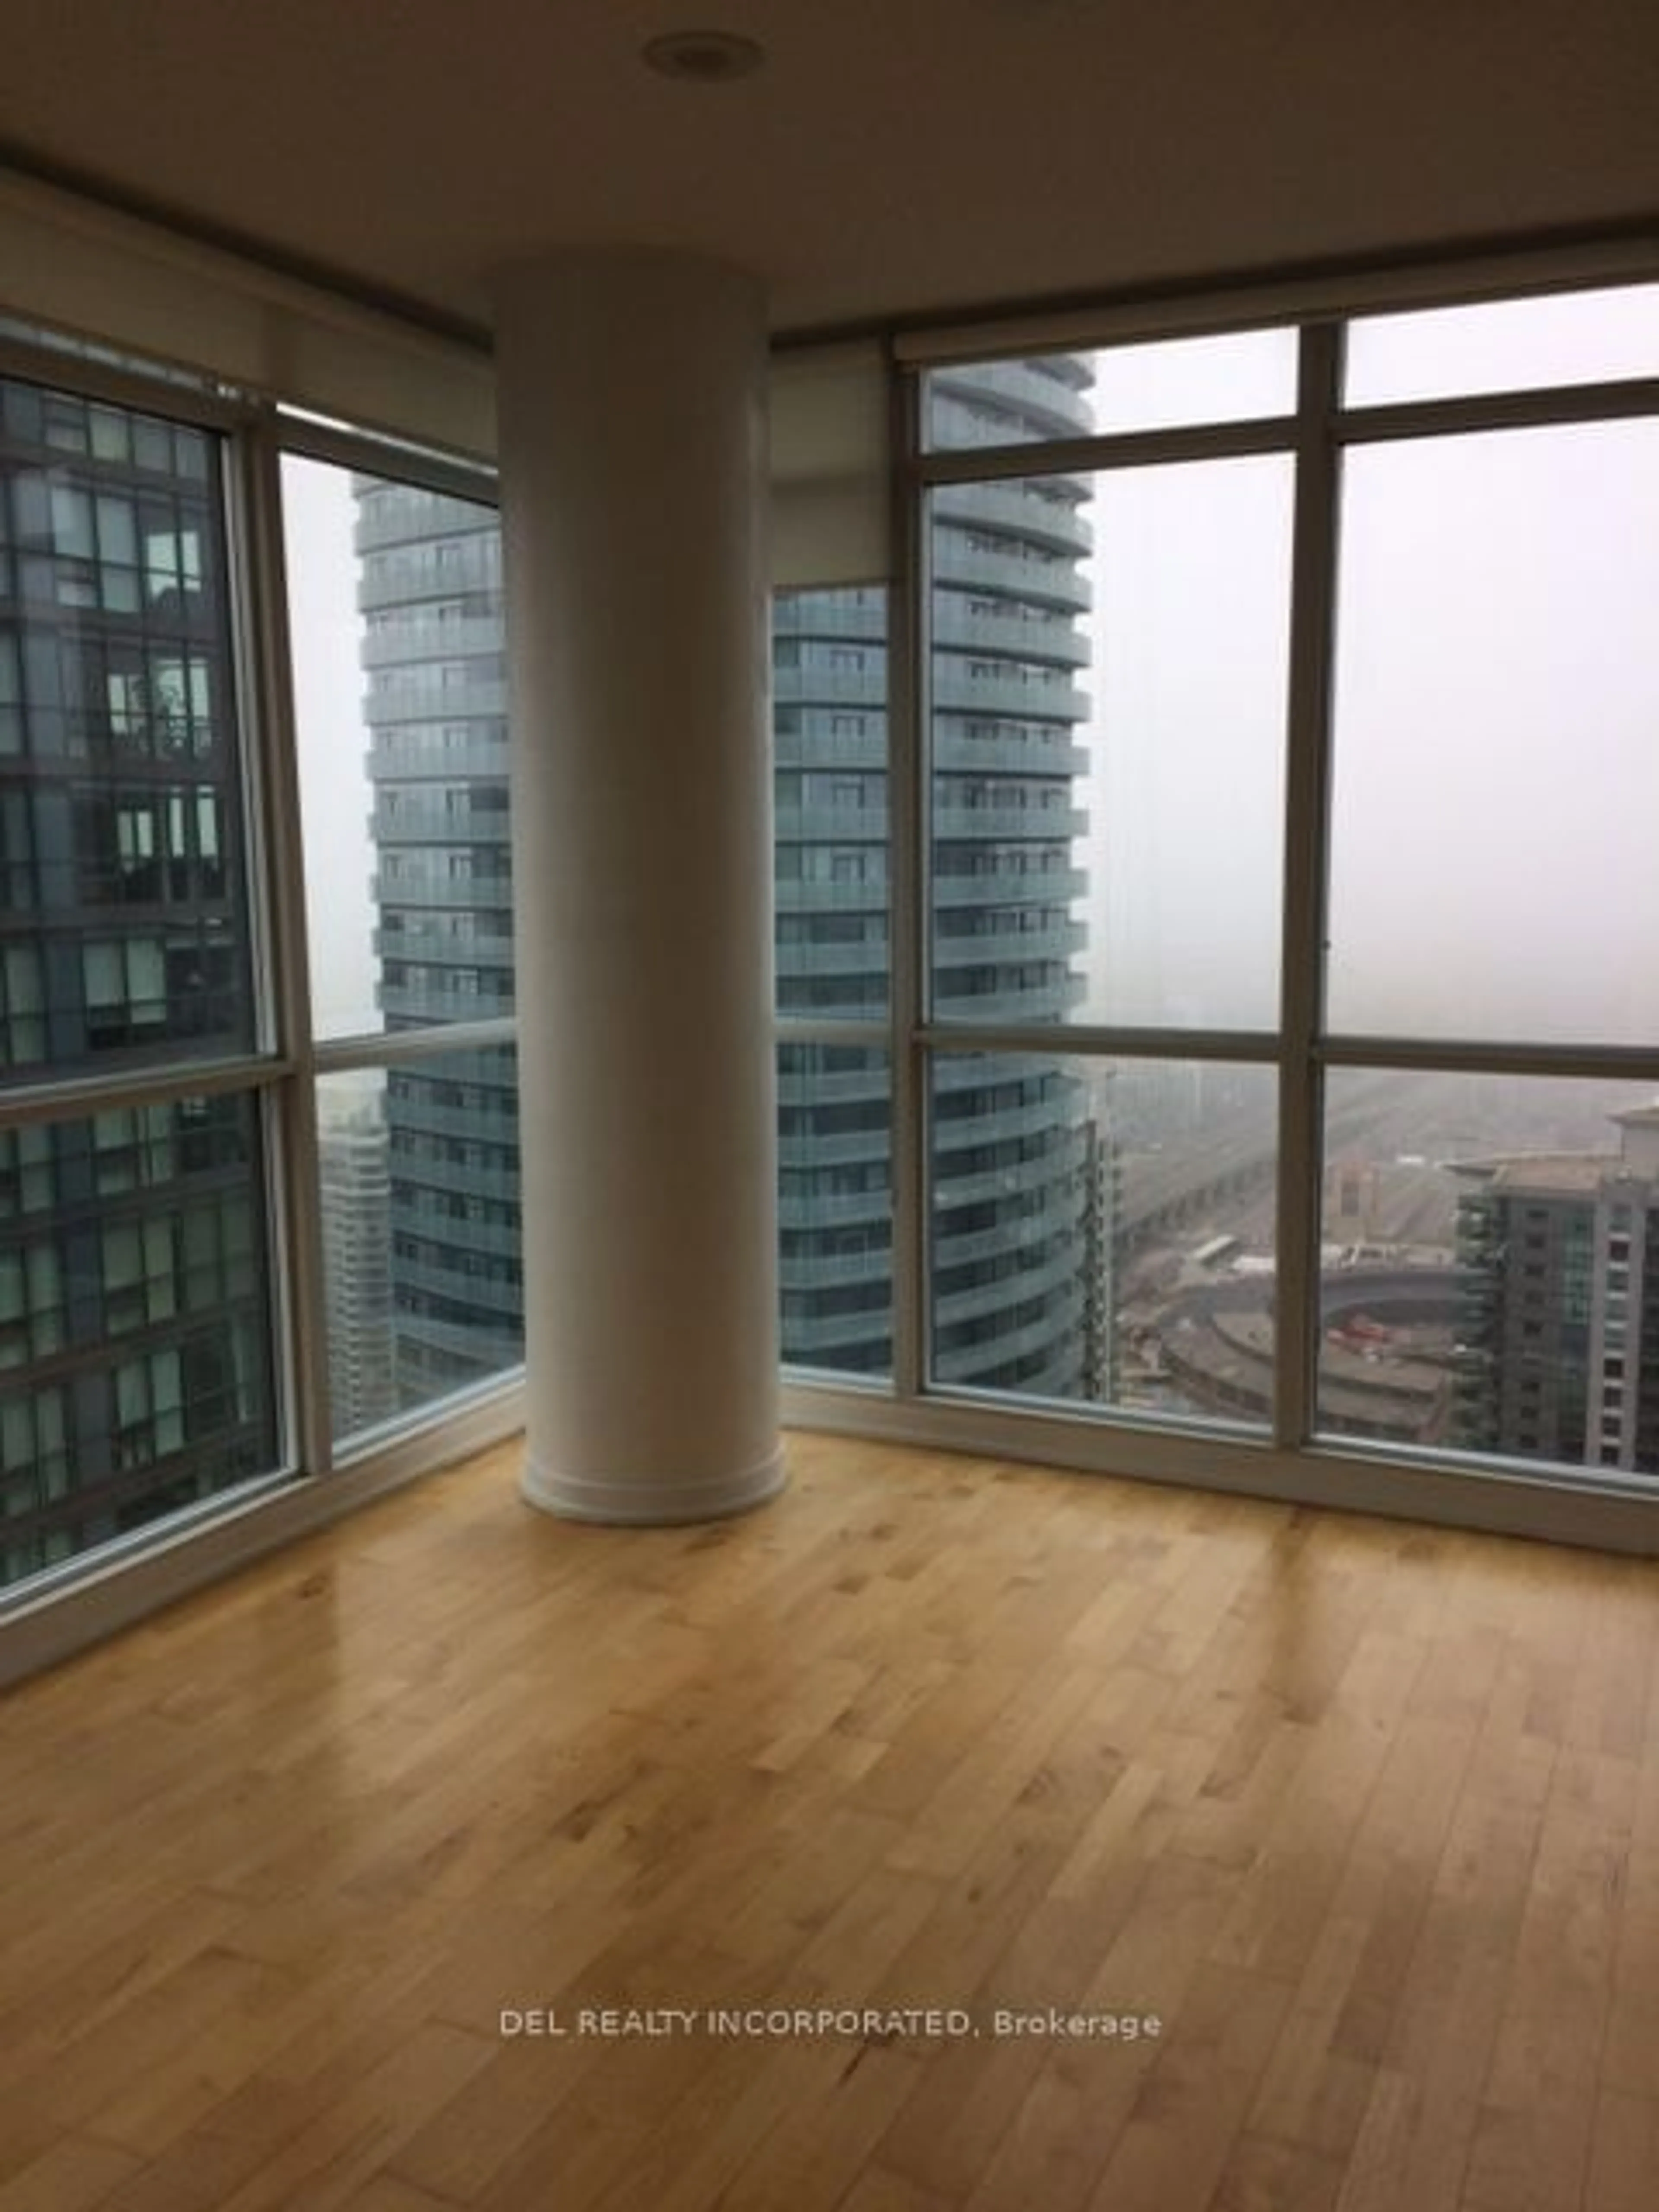 Other indoor space for 65 Bremner Blvd #4102, Toronto Ontario M5J 0A7